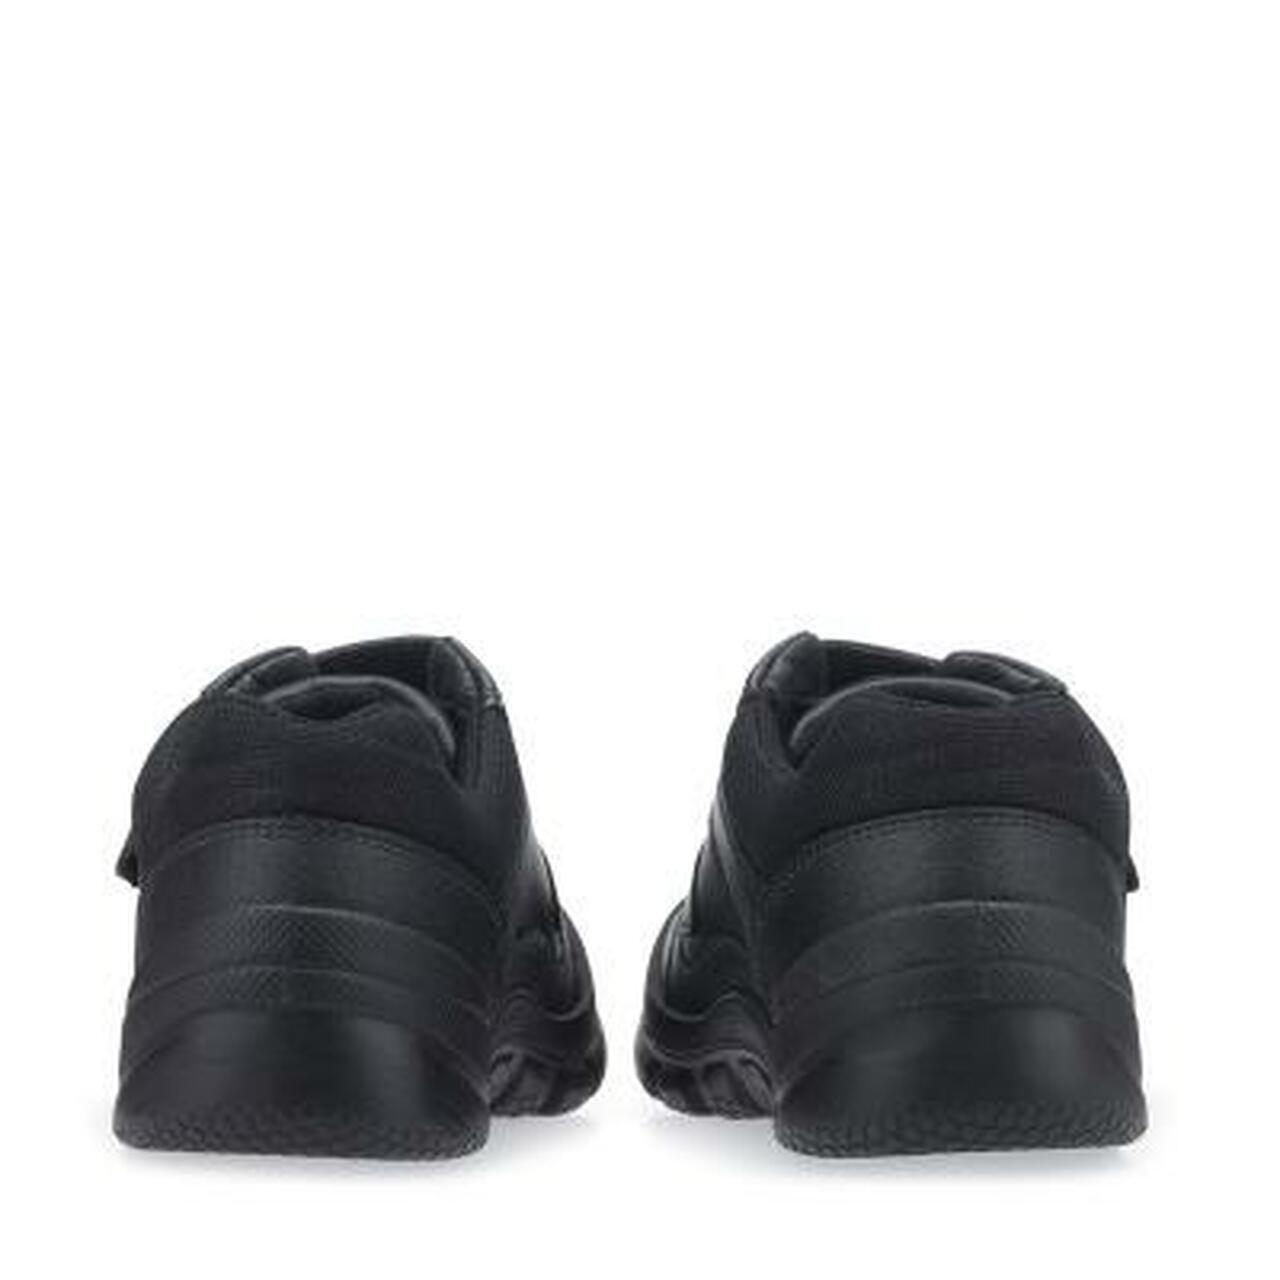 A pair of boys school shoes by Start Rite, style Warrior, in black leather with double velcro fastening. Back view.